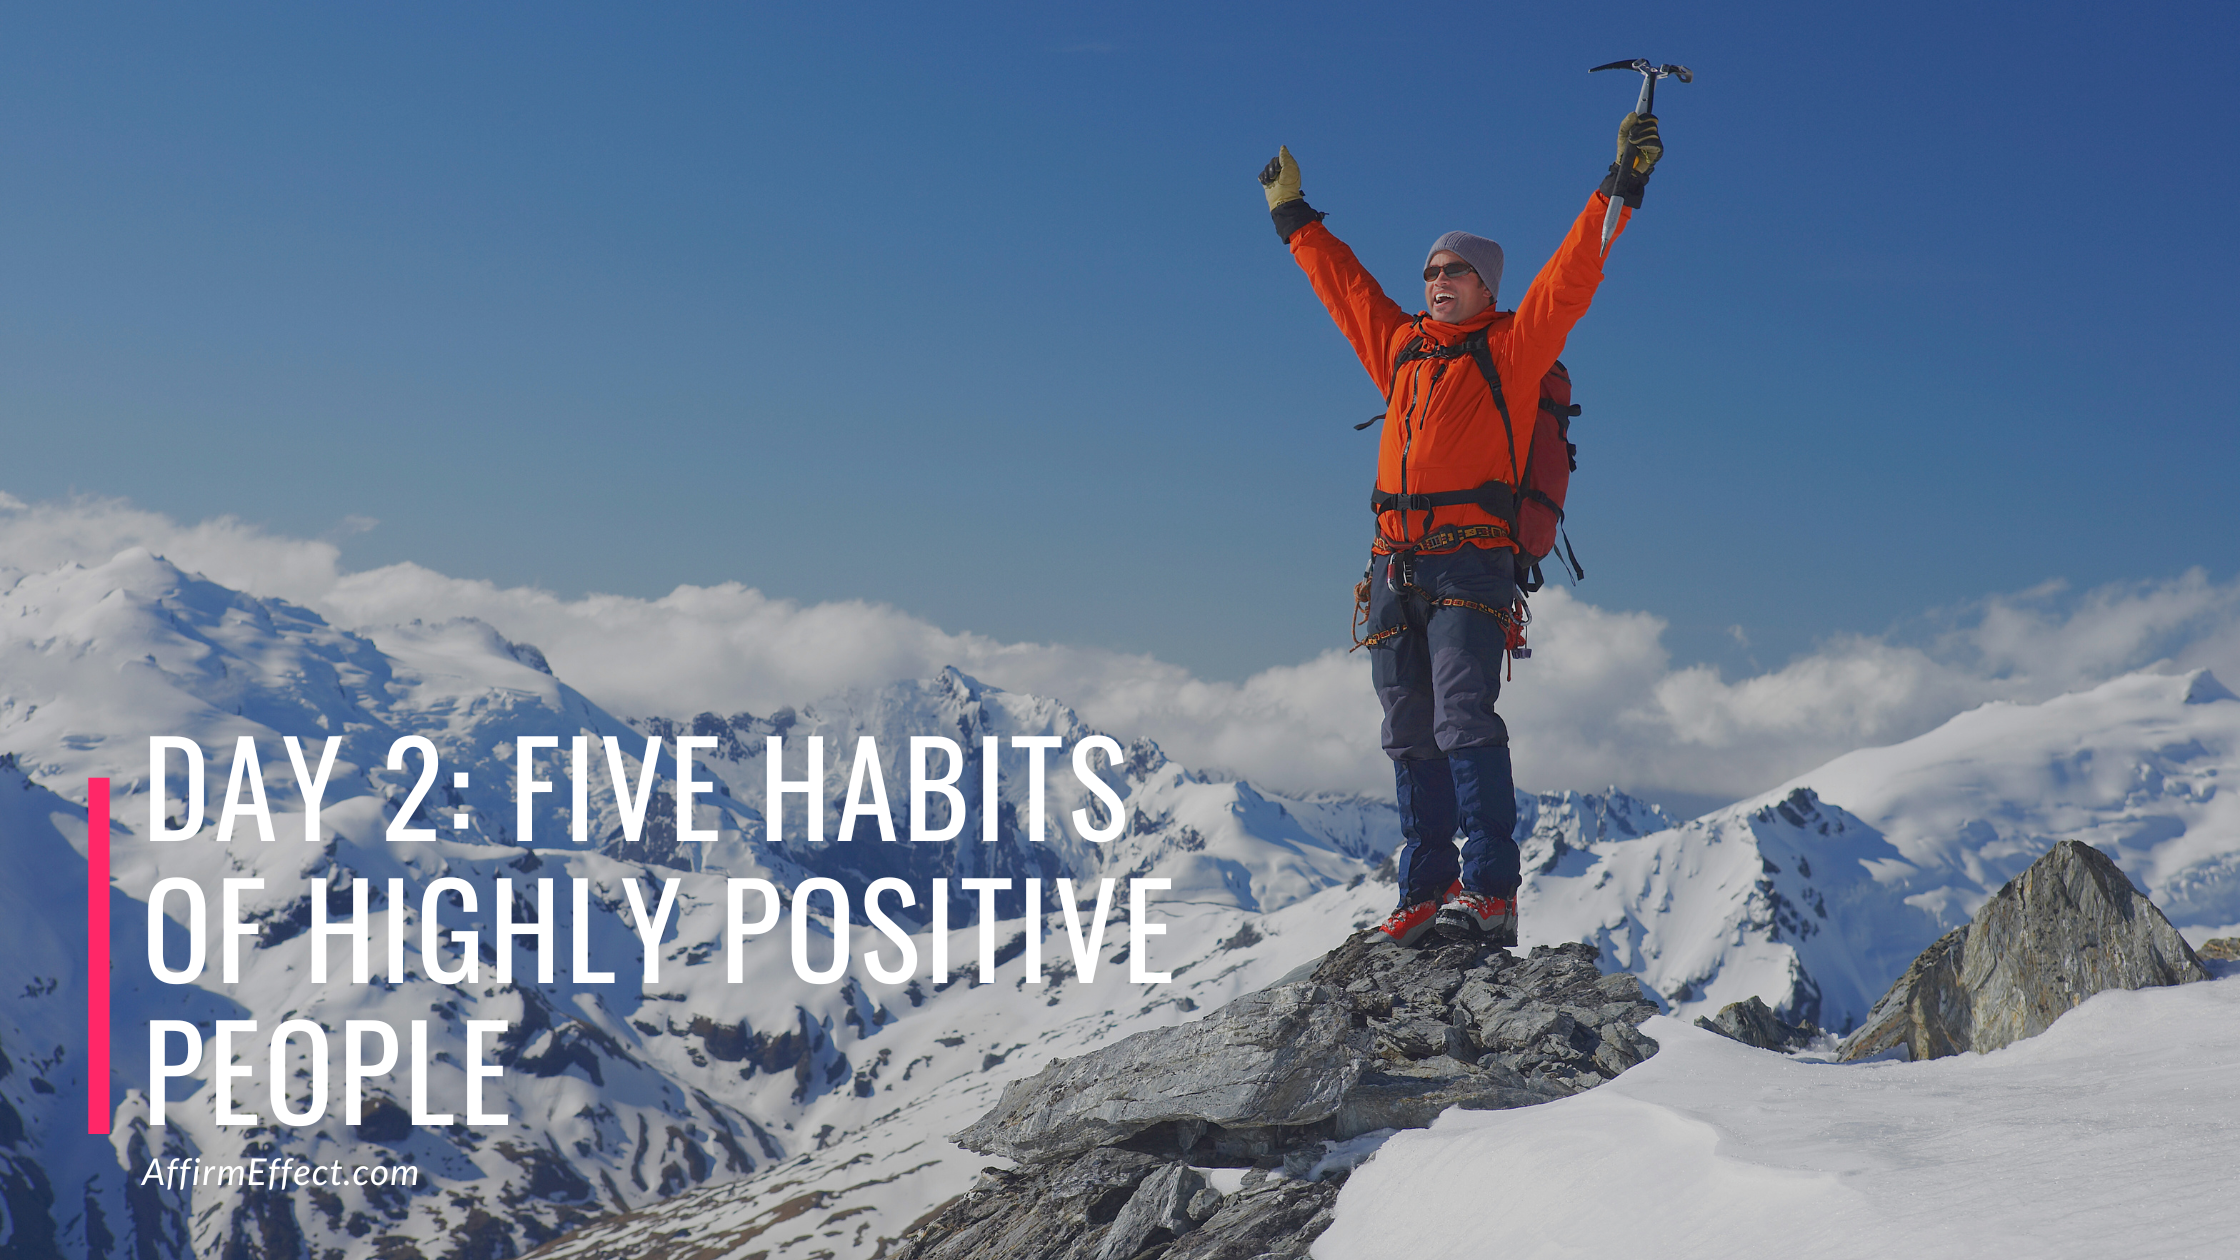 Day 2: Five Habits of Highly Positive People